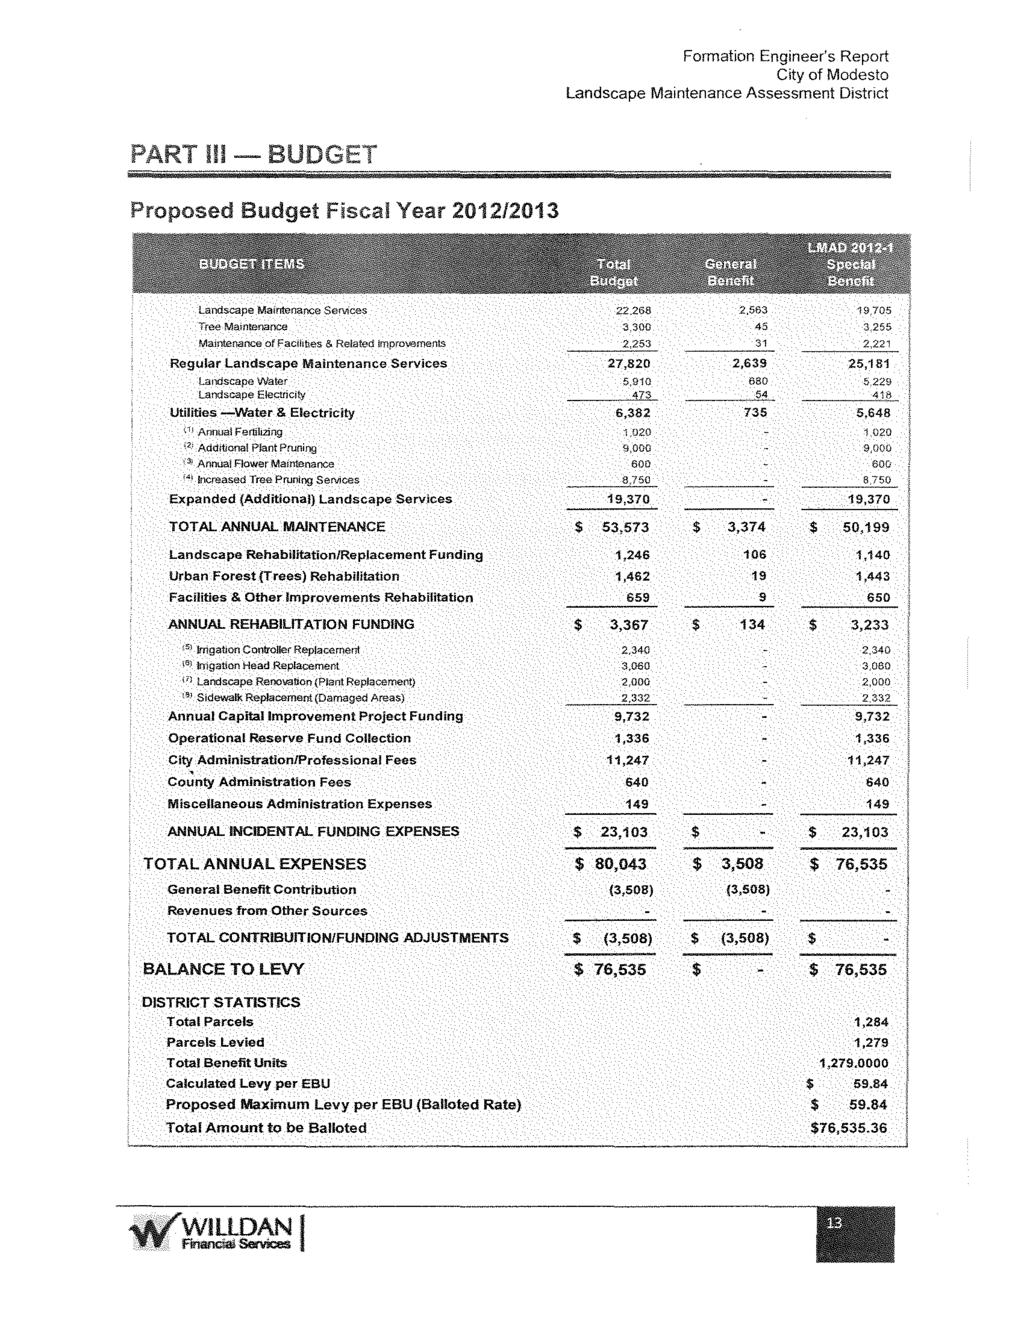 Formation Engineer's Report City of Modesto Landscape Maintenance Assessment District PART III - BUDGET Proposed Budget Fiscal Year 2012/2013 Landscape Maintenance Services Tree Maintenance